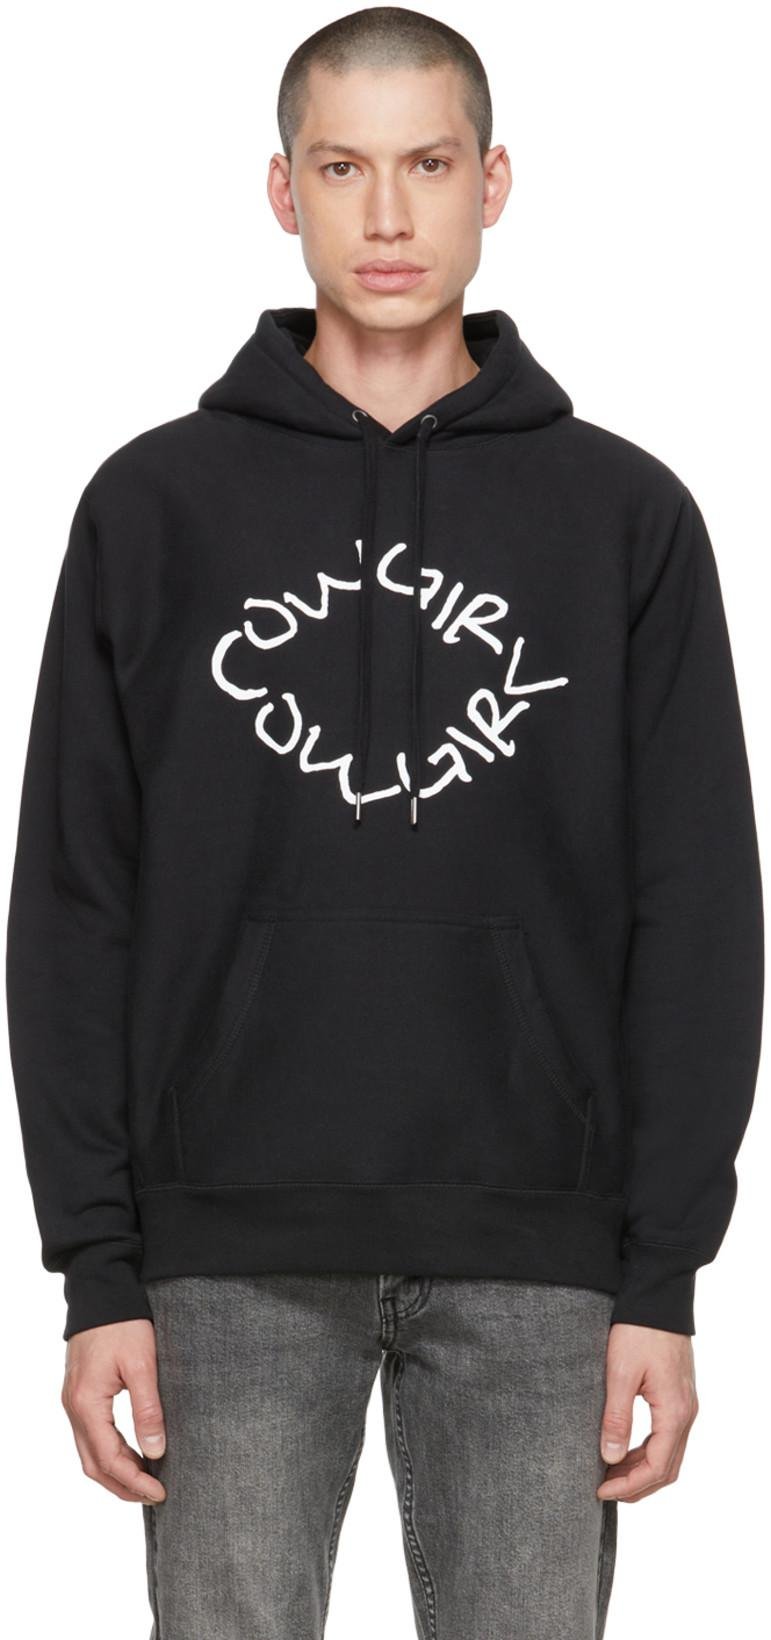 Black Penmanship Hoodie by COWGIRL BLUE CO